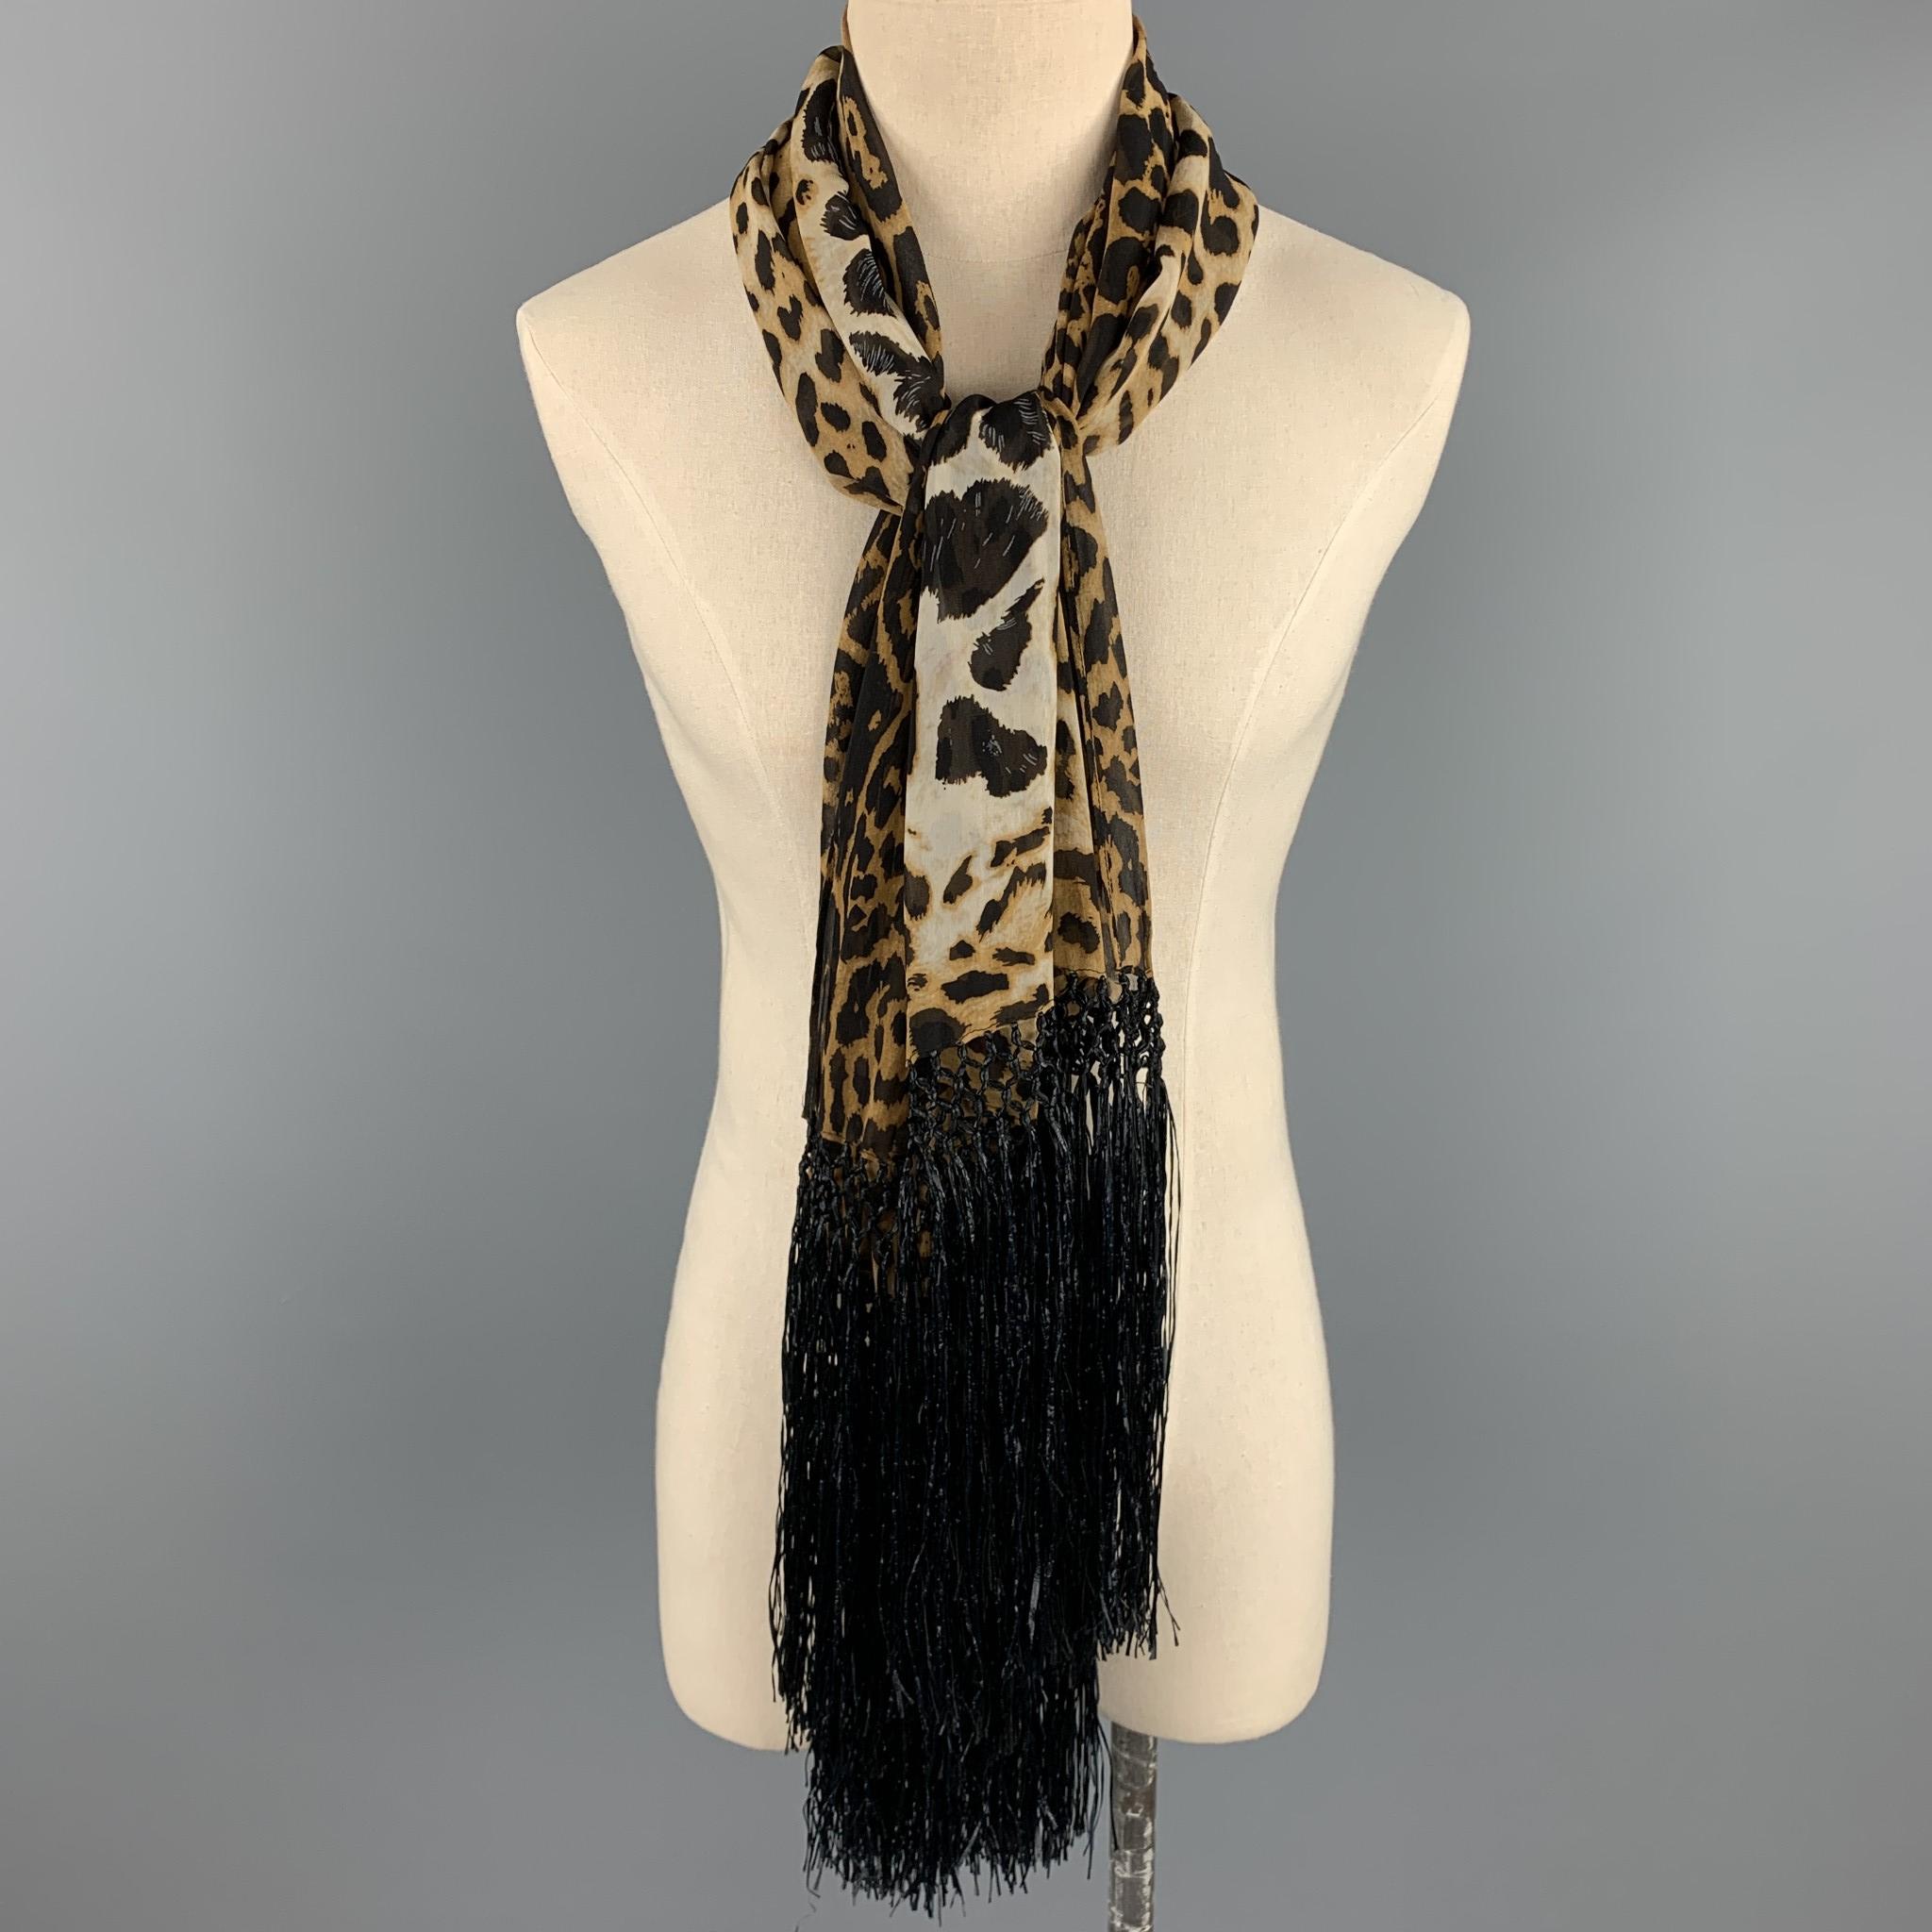 YVES SAINT LAURENT by TOM FORD scarf comes in brown & tan leopard print silk with a twelve inch fringe trim. Made in Italy. 

Excellent Pre-Owned Condition:

Measurements:

56 in. x 26 in. 